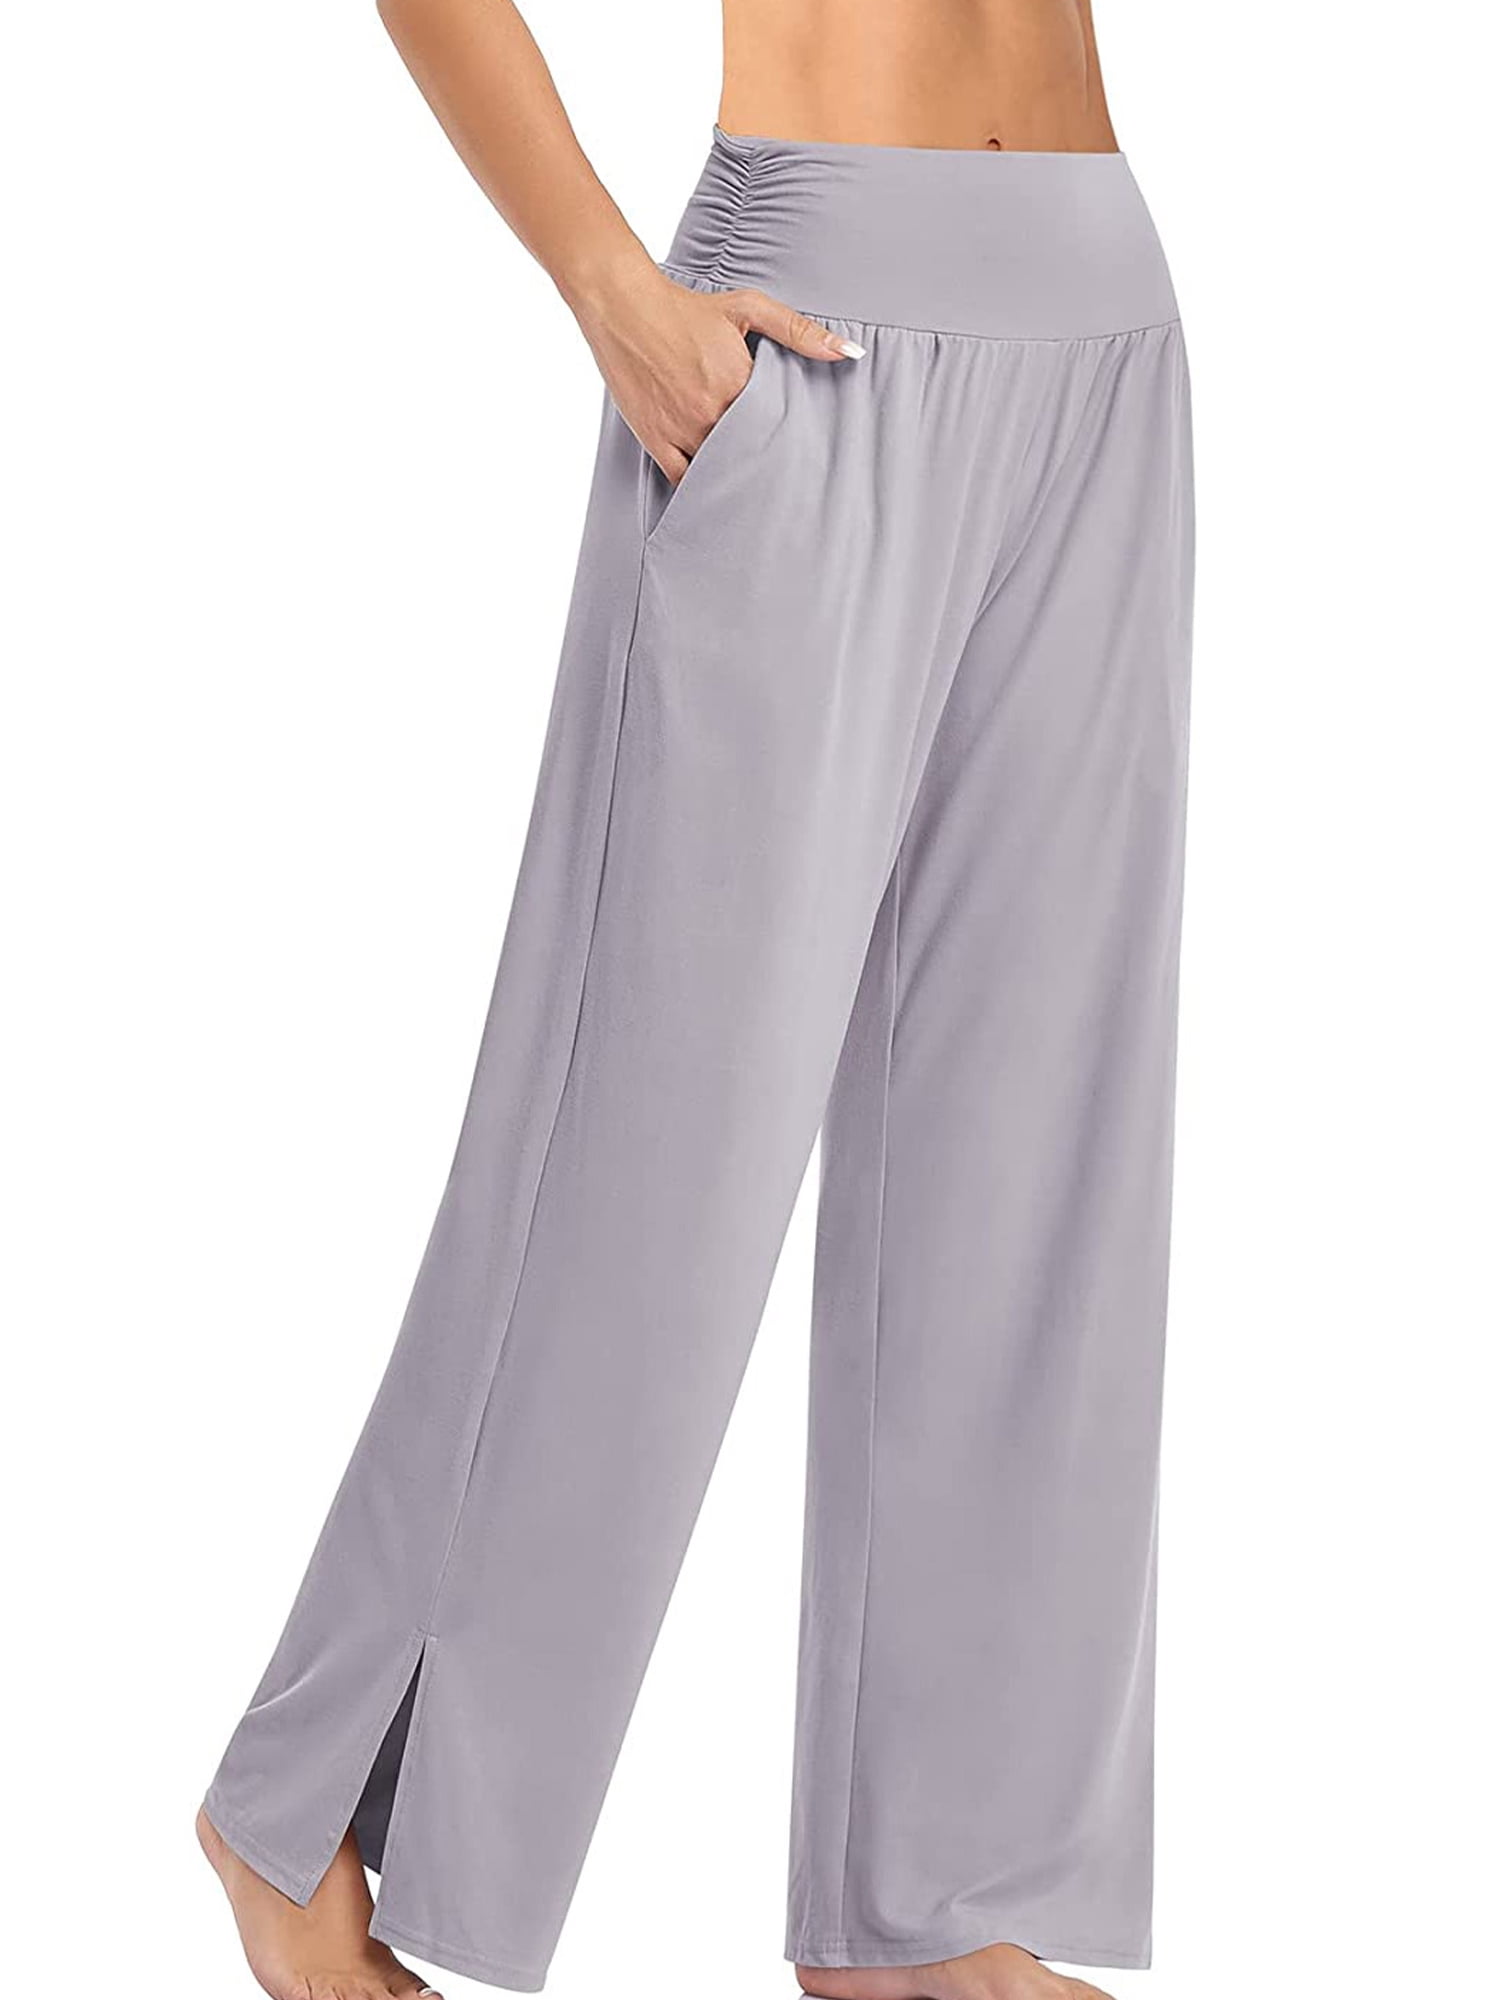 Grianlook Womens Palazzo Wide Leg Lounge Pants Casual Slit Pilate ...